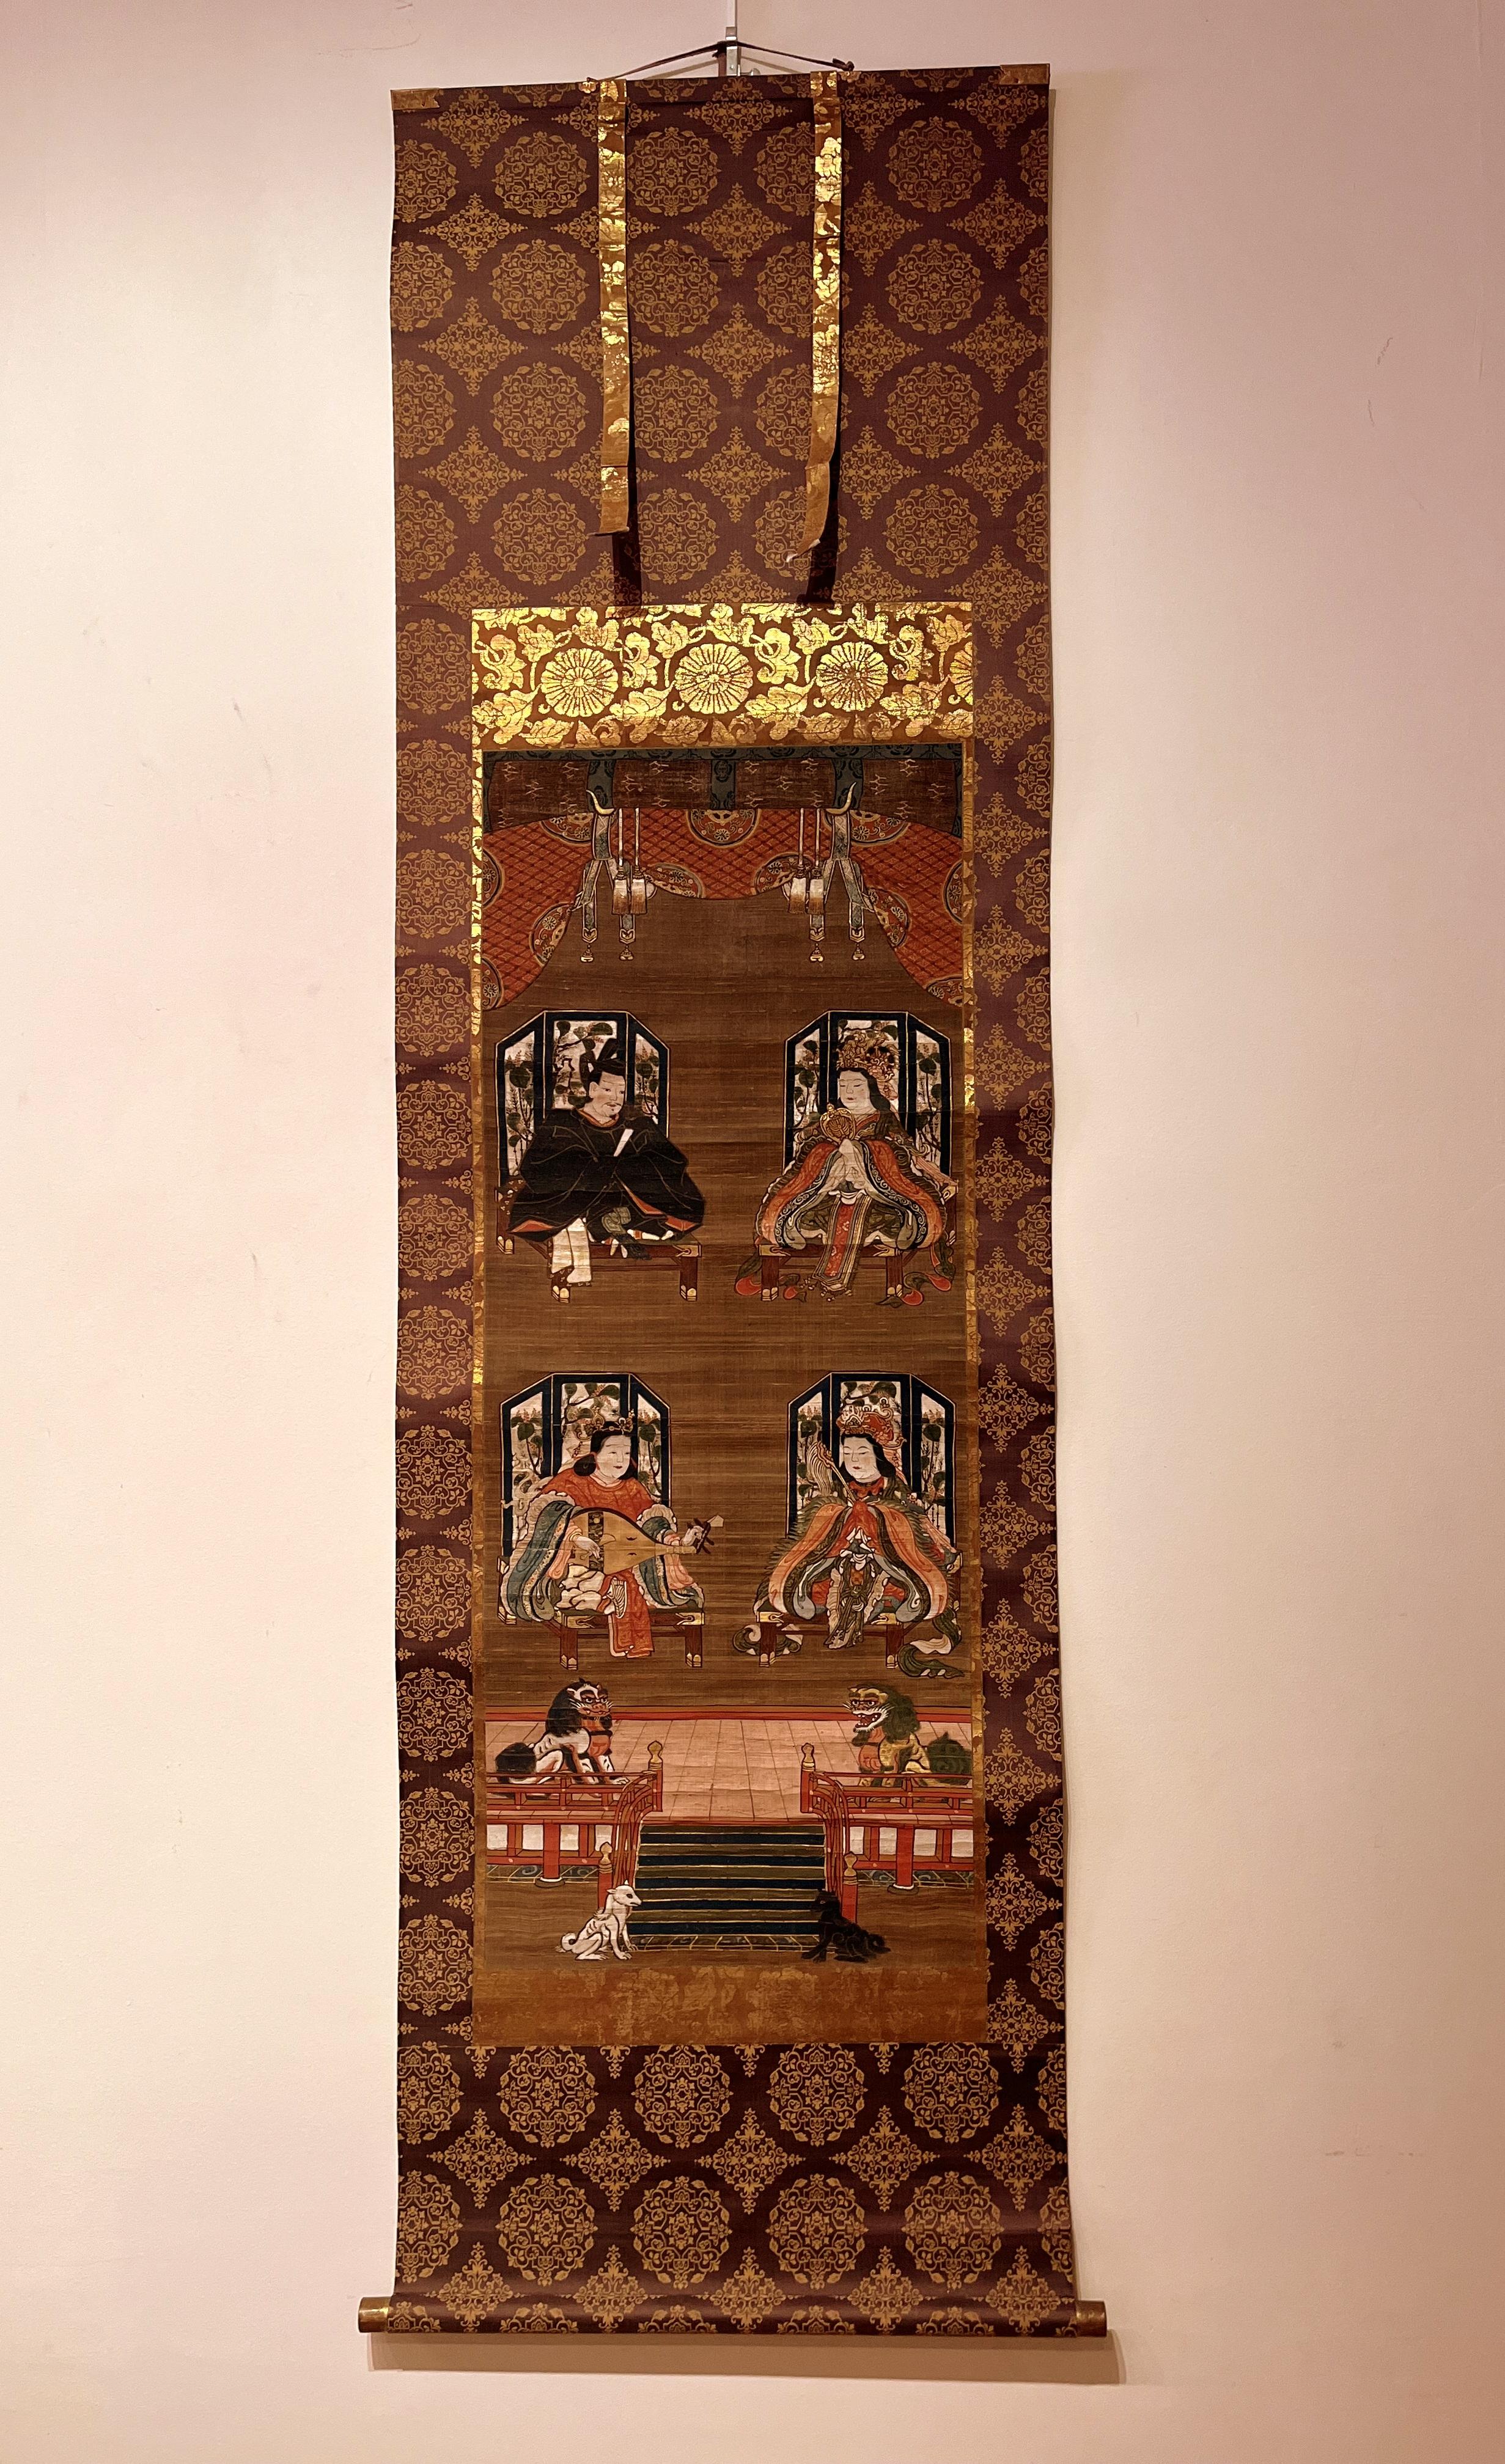 Japanese painting of Shito religion shrine depicted the four deities in court dress represent a hierarchy of local Shinto gods (kami) and with pair of guardian lions and lower stairway with white and black fox.
The upper pair comprises Kariba Myōjin